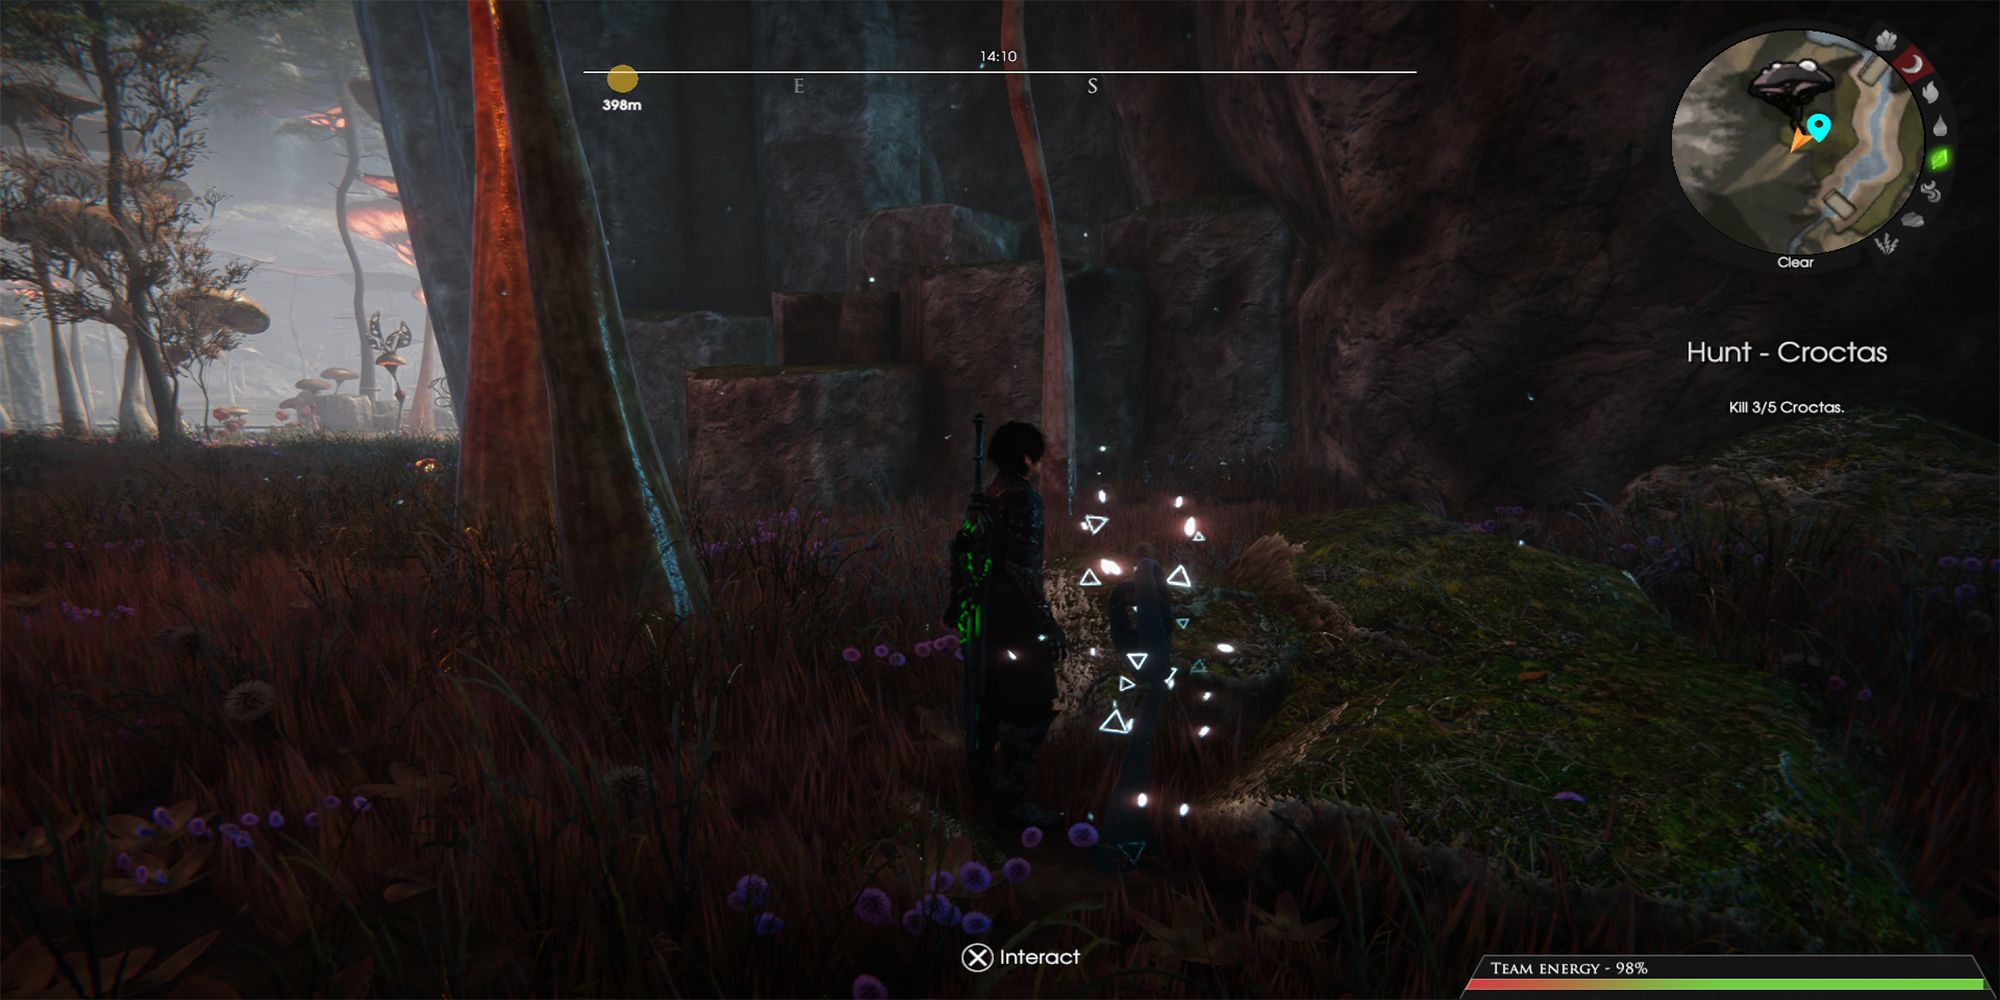 Daryon looks at a glowing harvesting material in the center of Herelsor's swamp in Edge of Eternity.